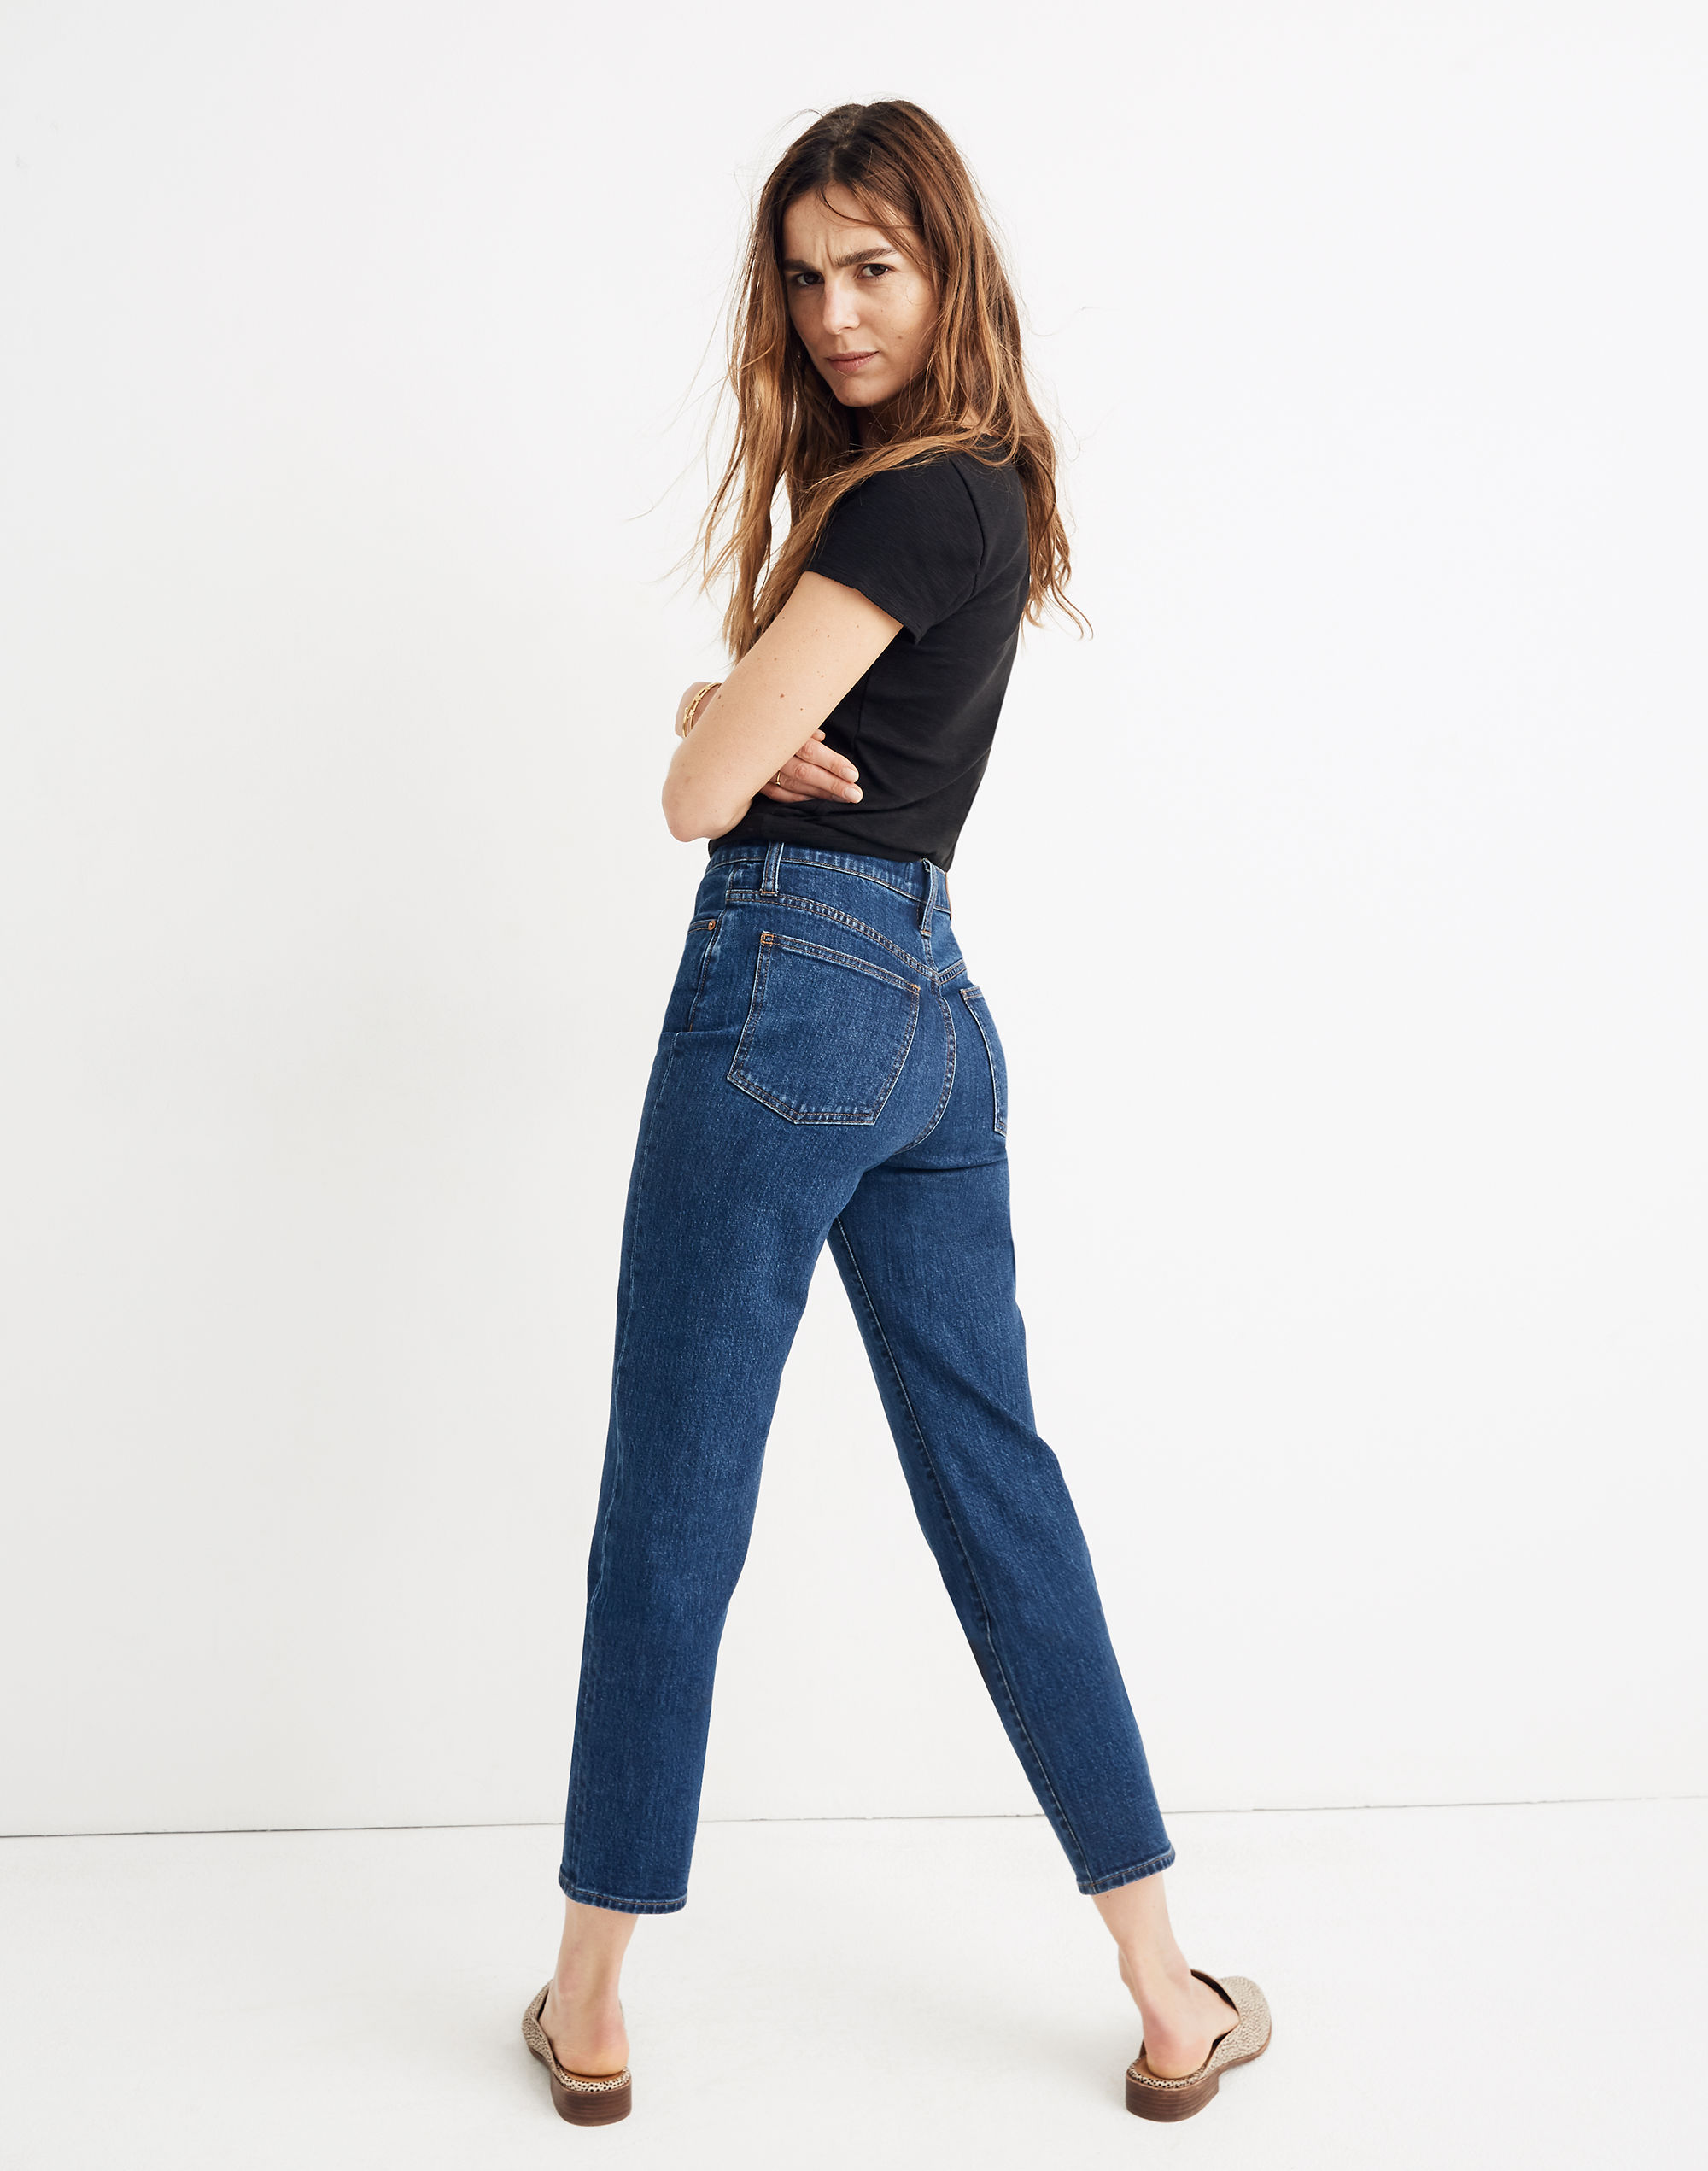 Tapered Jeans in Bellclaire Wash